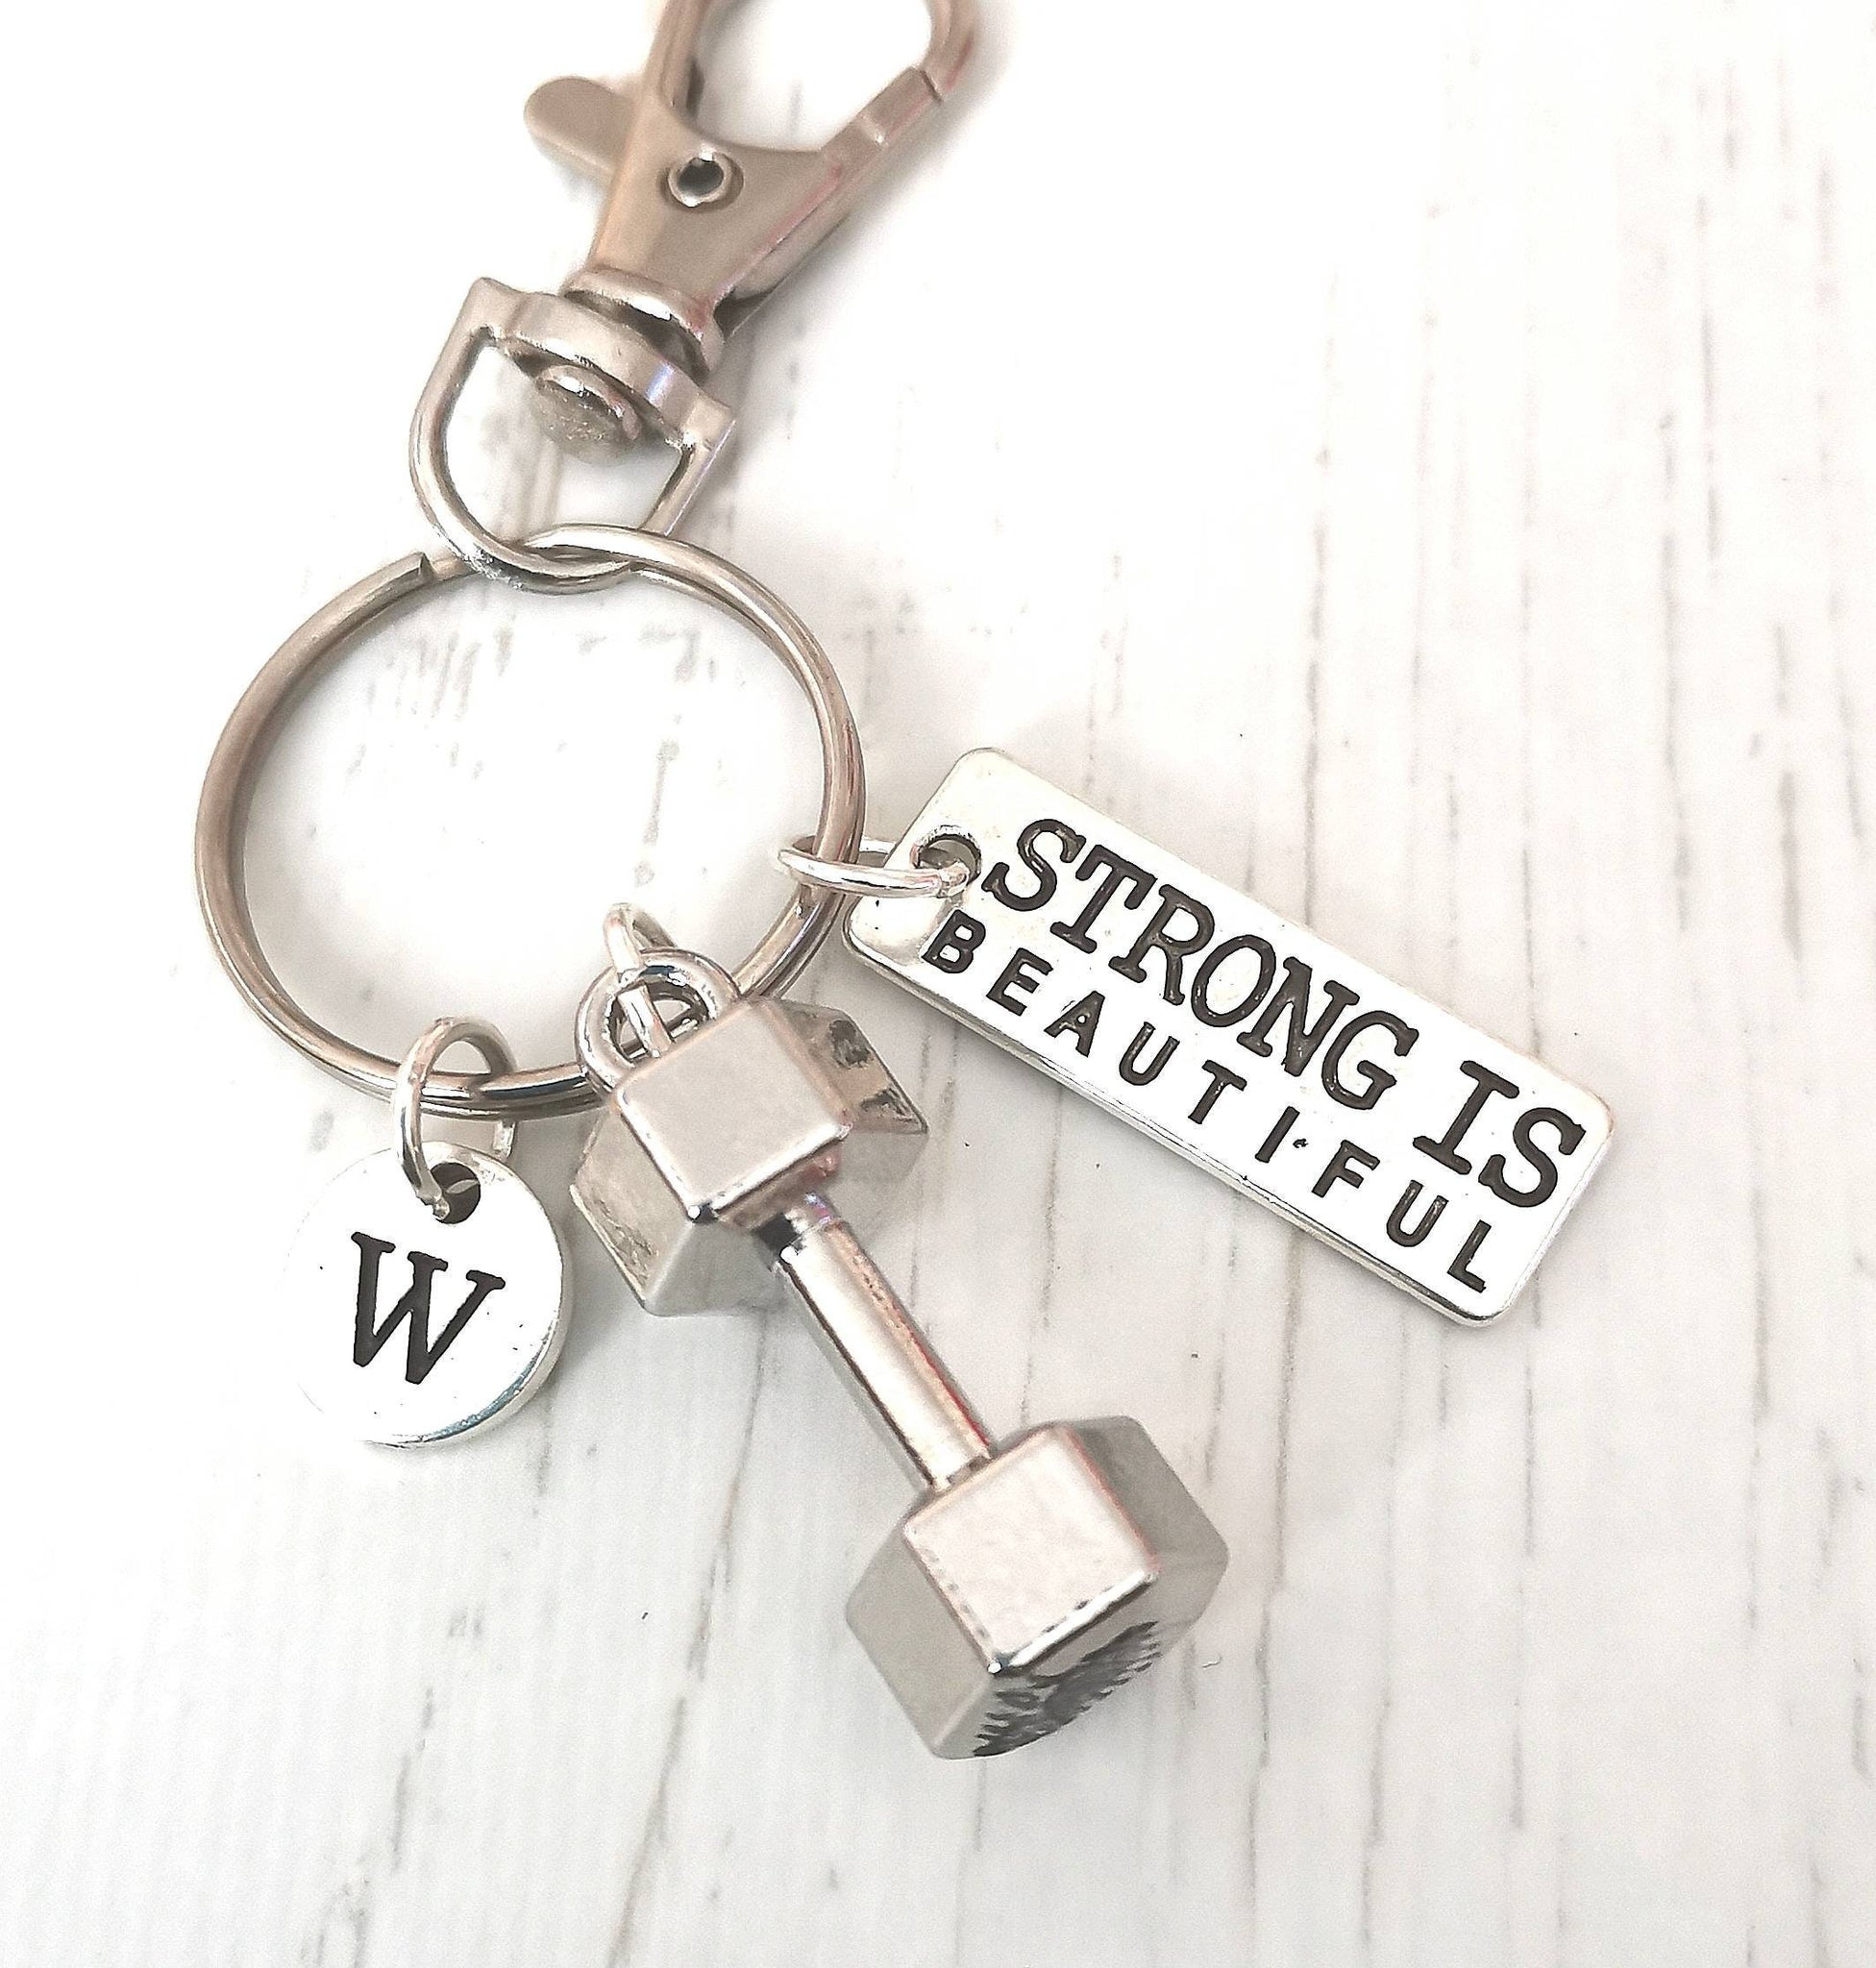 Workout Gift Keychain Fitness Gift Key Rings Bodybuilder Gifts